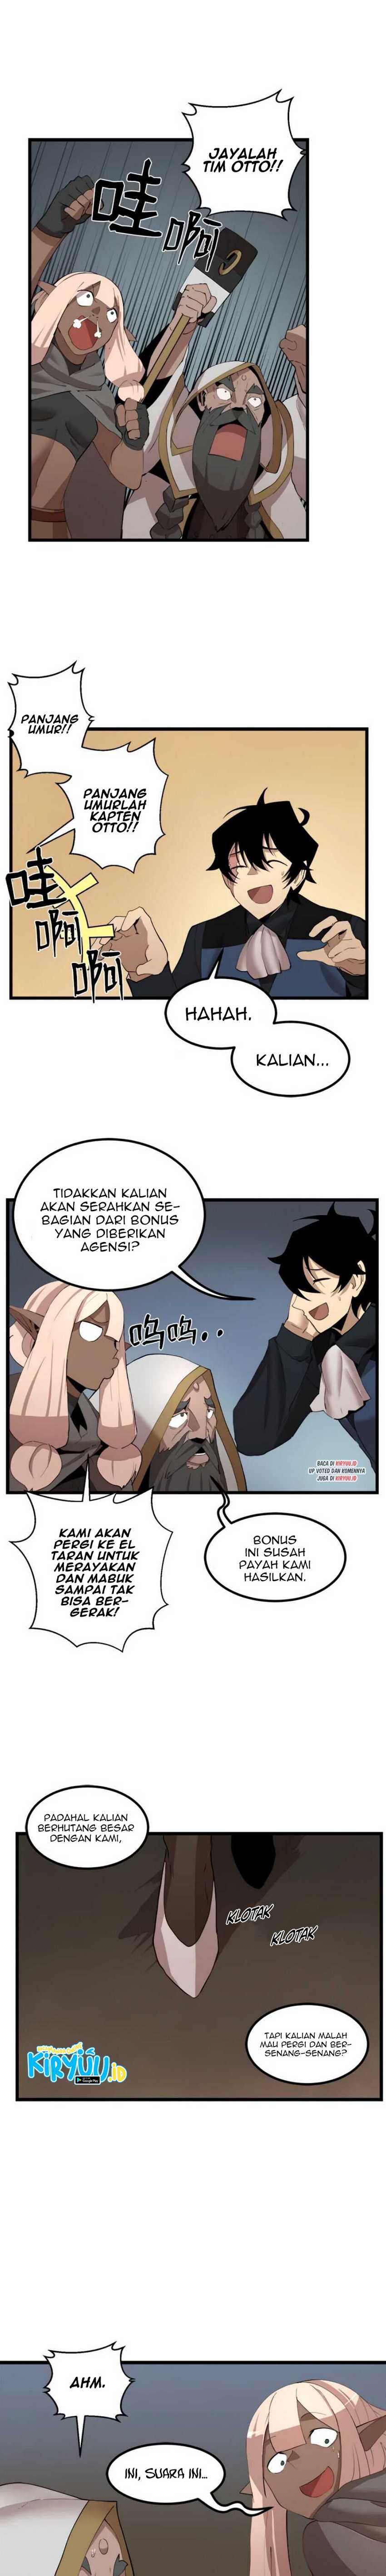 The Dungeon Master Chapter 88